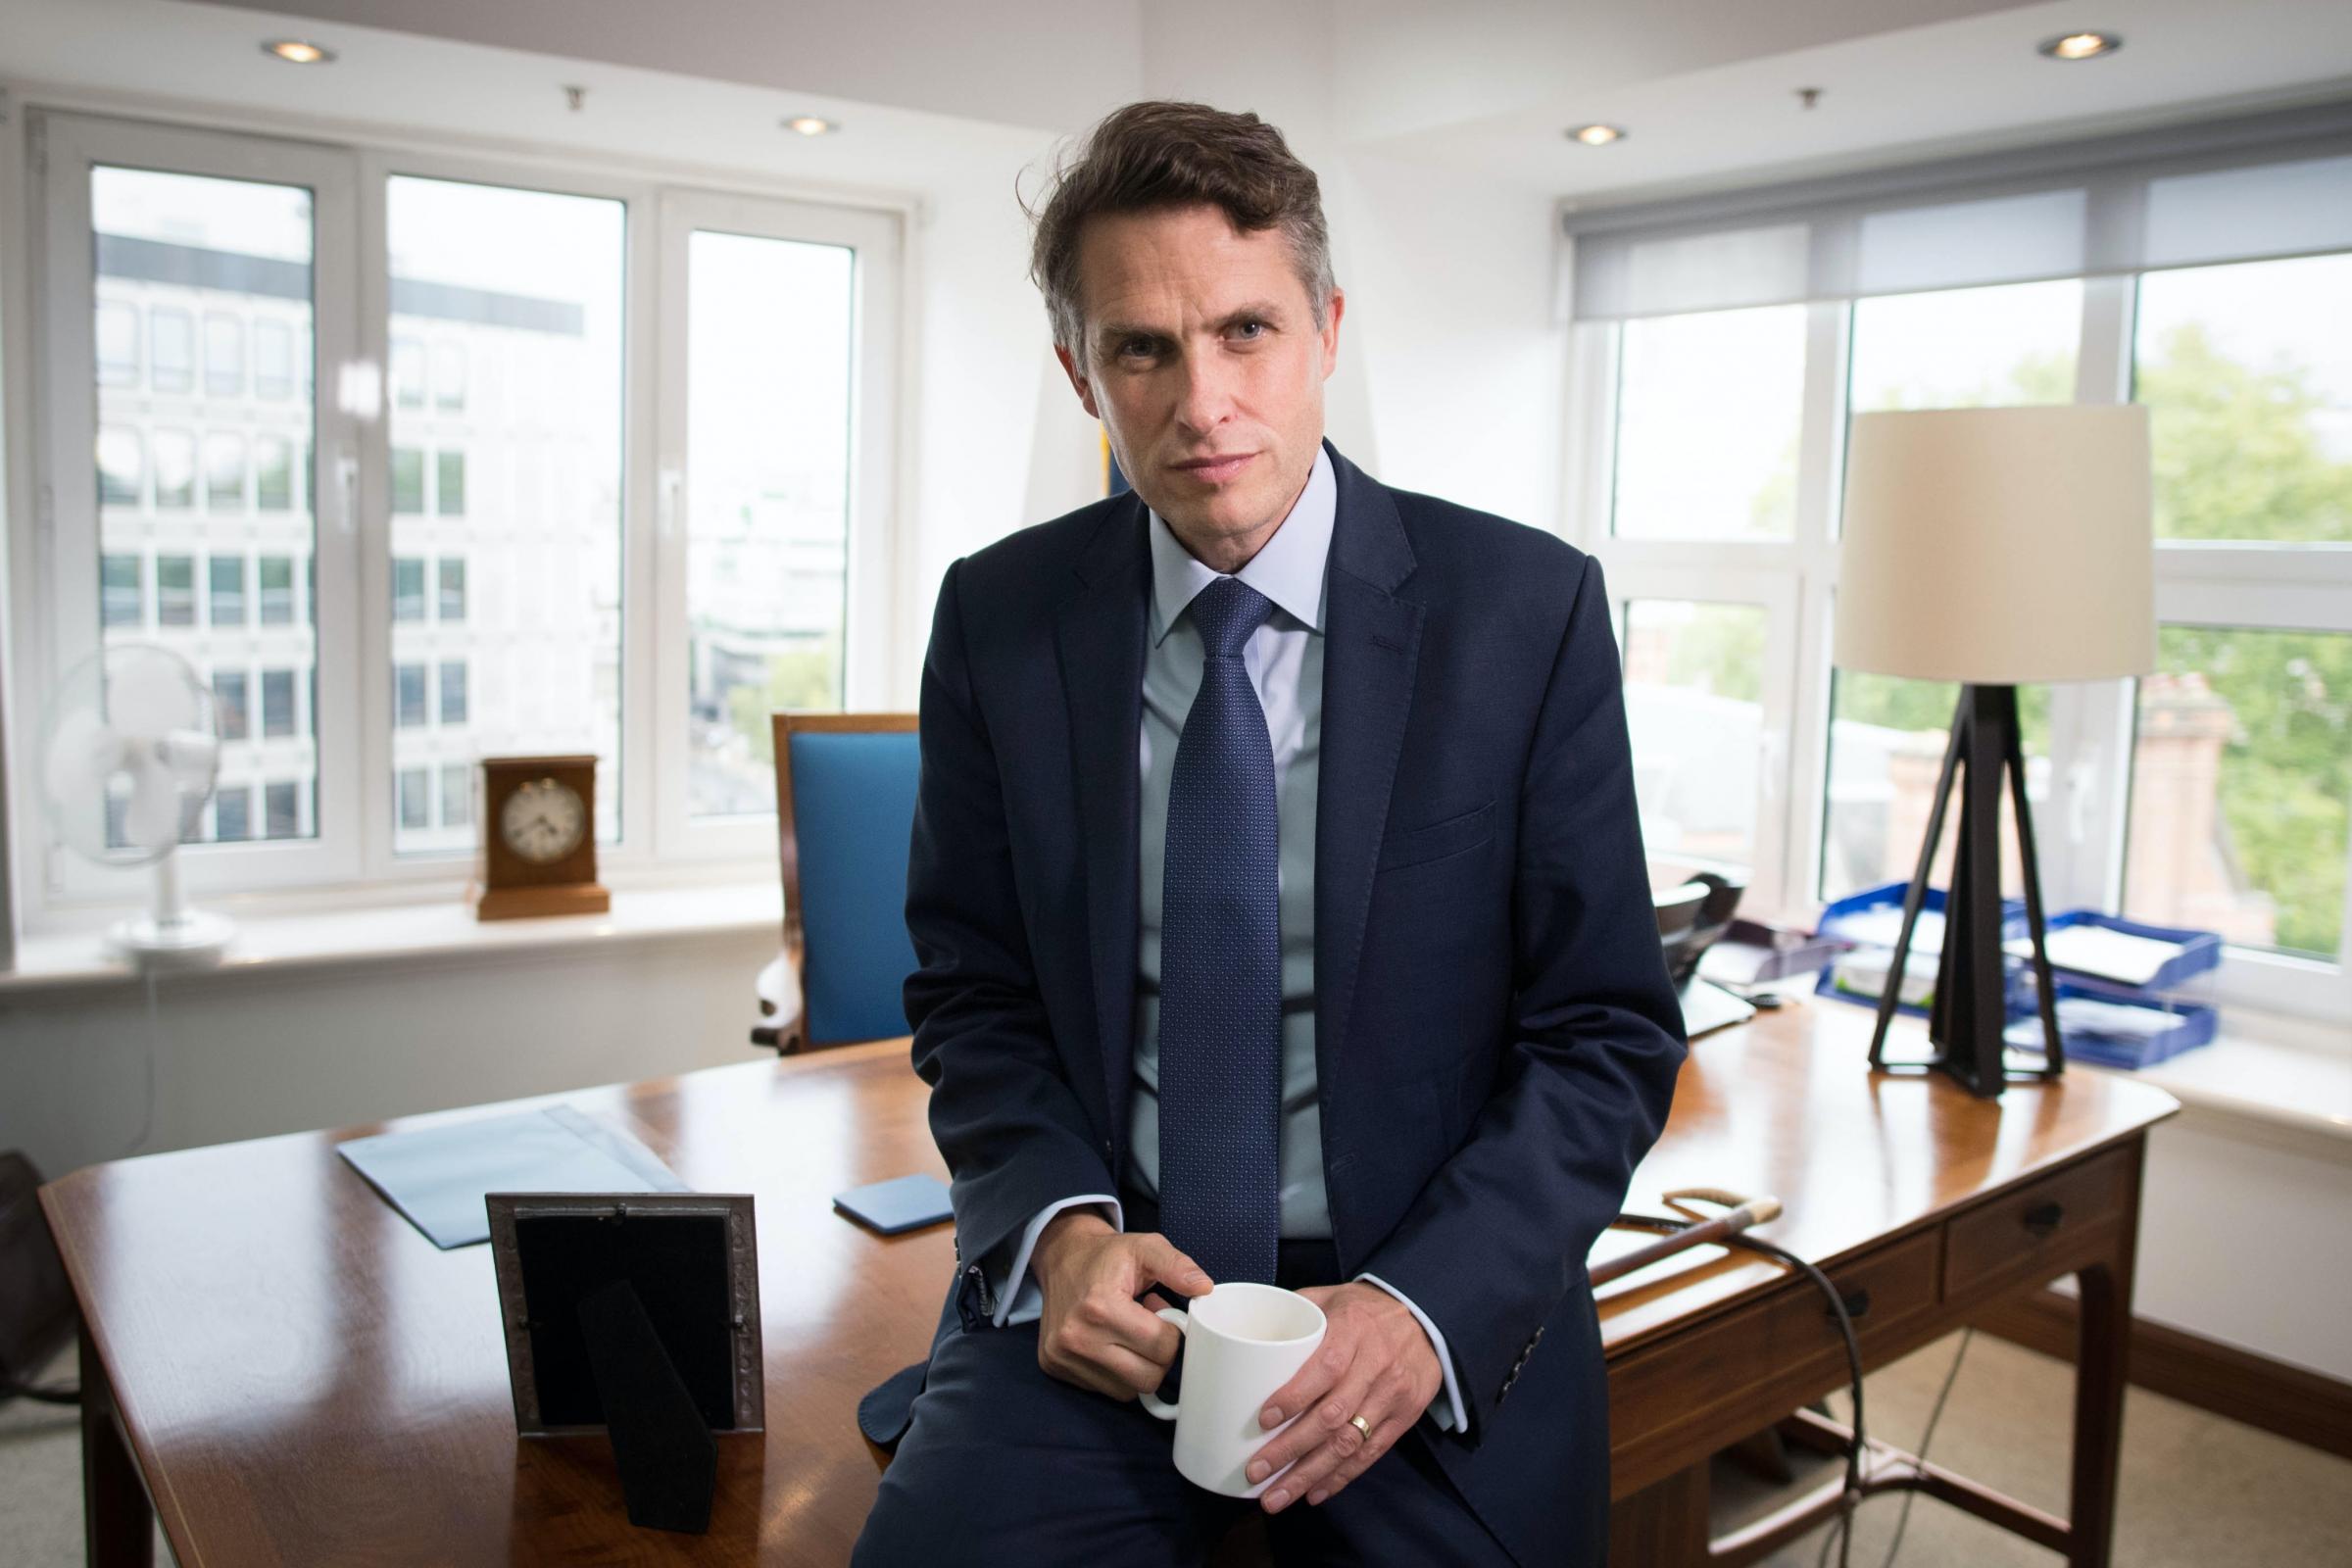 Gavin Williamson S Cabinet Role In Jeopardy For A Second Time In His Career Peeblesshire News